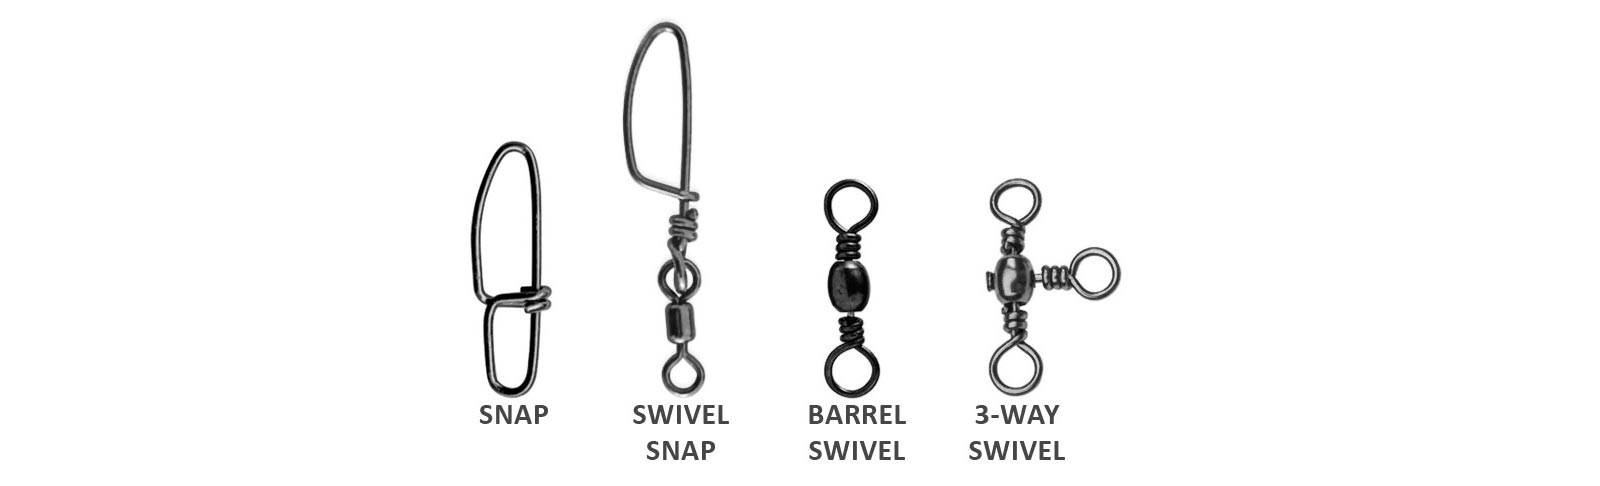 Snaps and Swivels Diagram